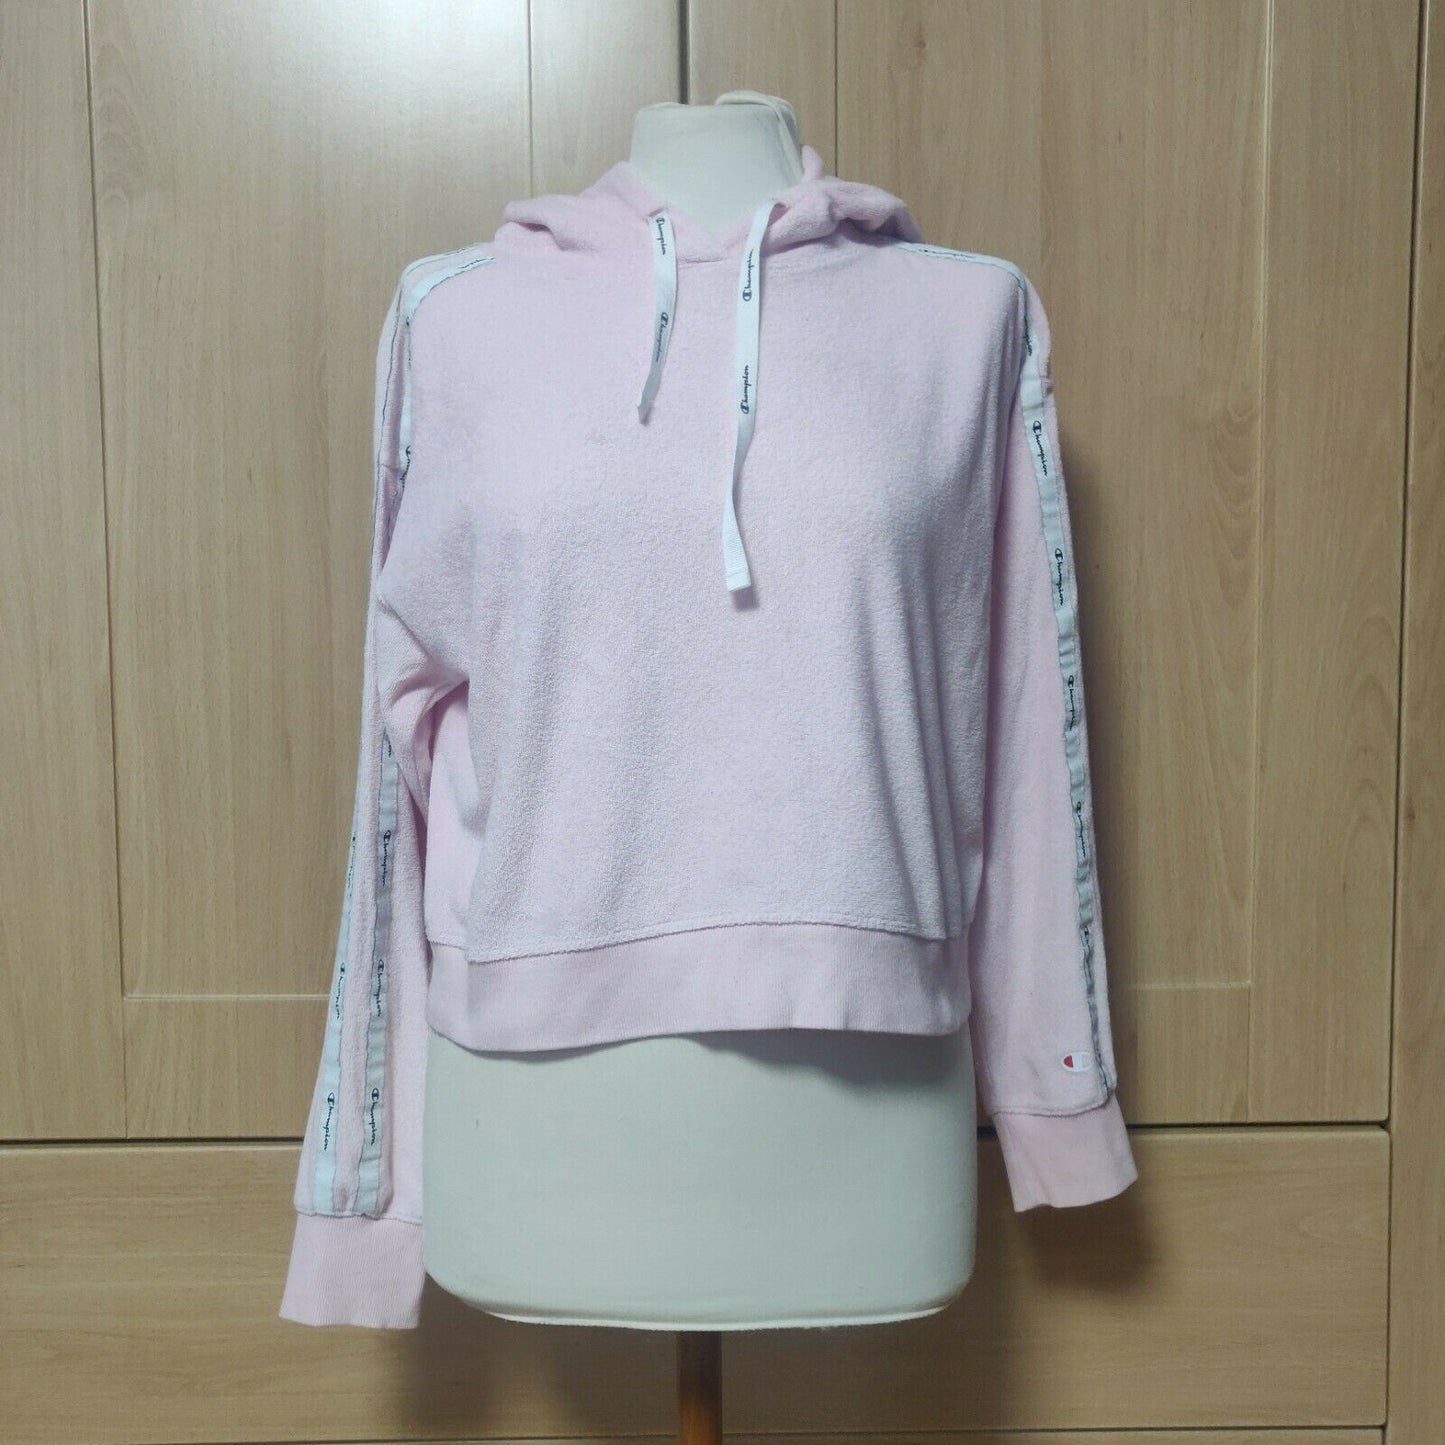 Champions Pink Pullover Hoodie Women Size Small